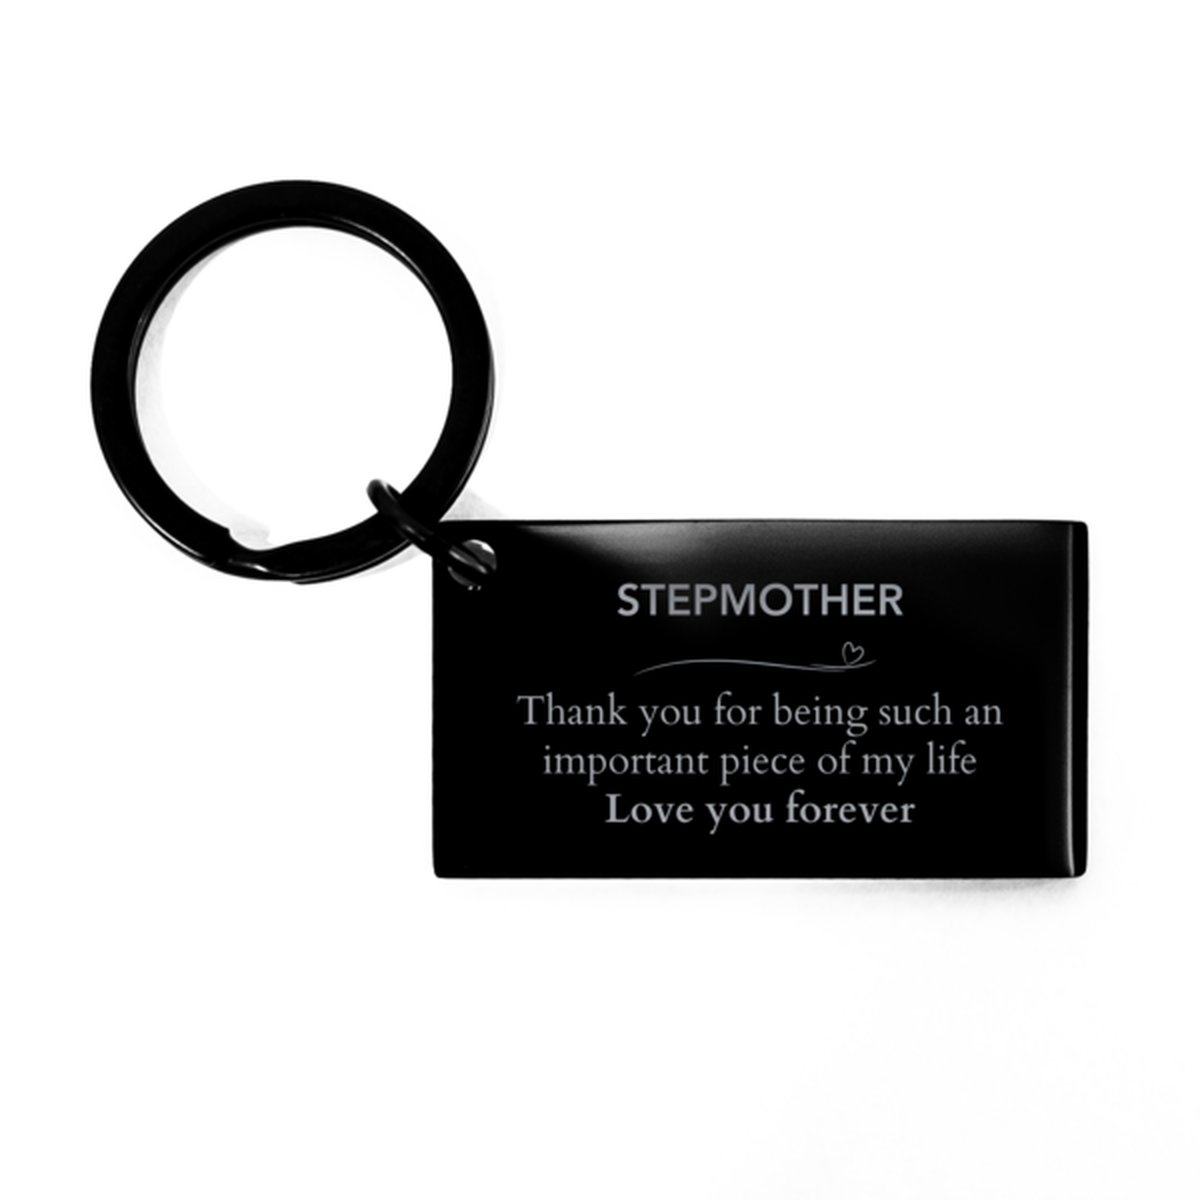 Appropriate Stepmother Keychain Epic Birthday Gifts for Stepmother Thank you for being such an important piece of my life Stepmother Christmas Mothers Fathers Day